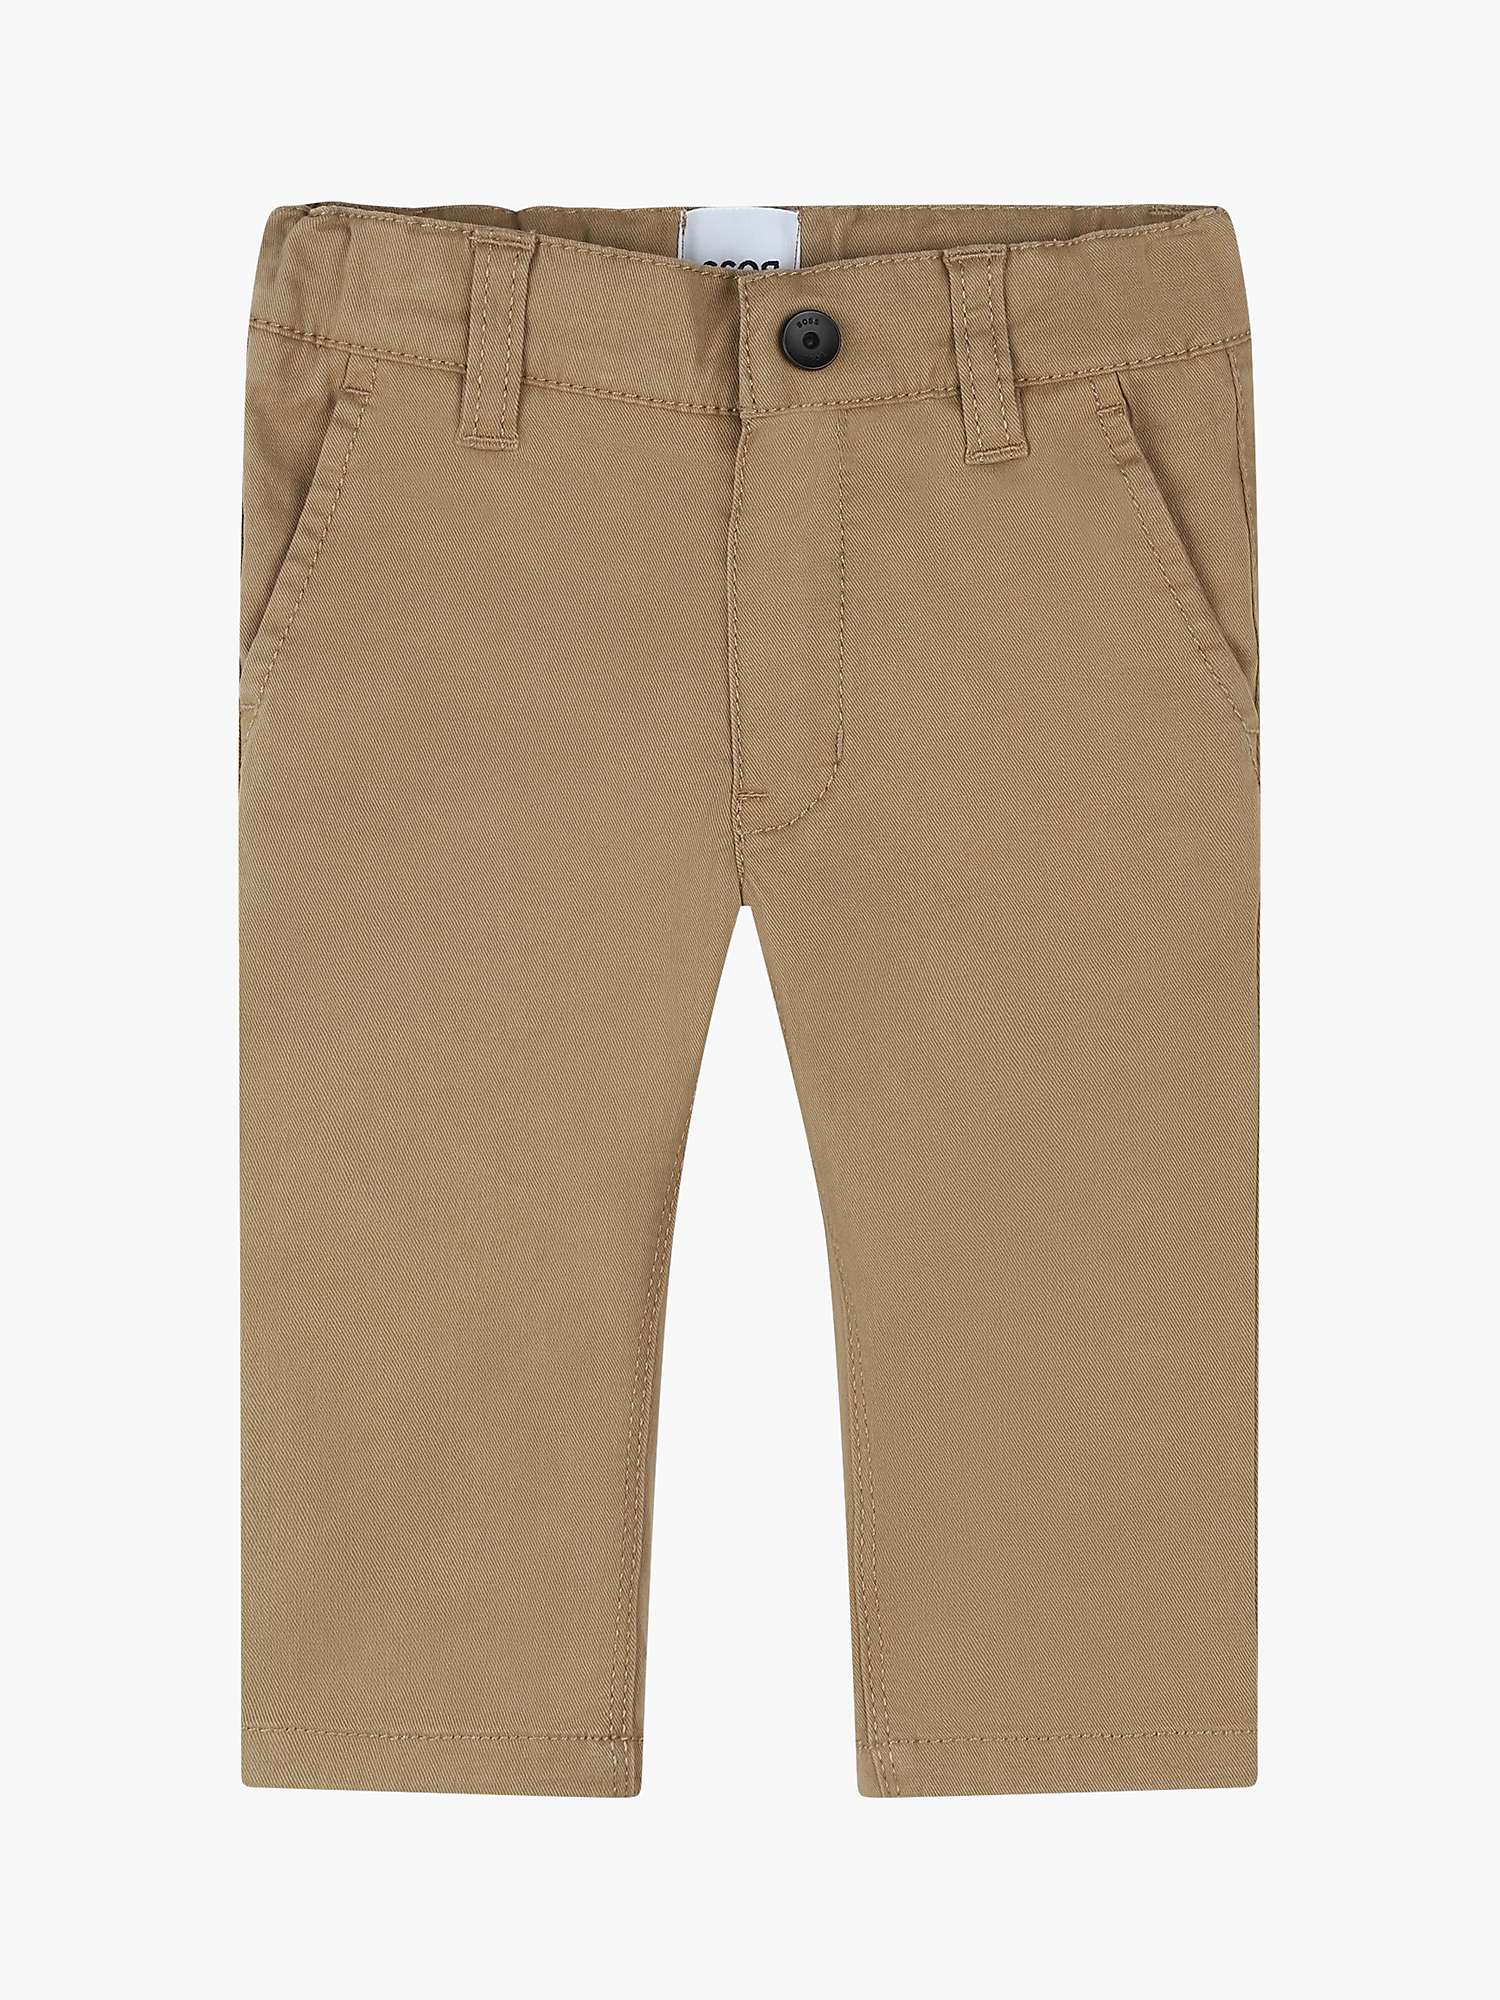 Buy BOSS Baby Adjustable Waist Twill Trousers, Beige Online at johnlewis.com